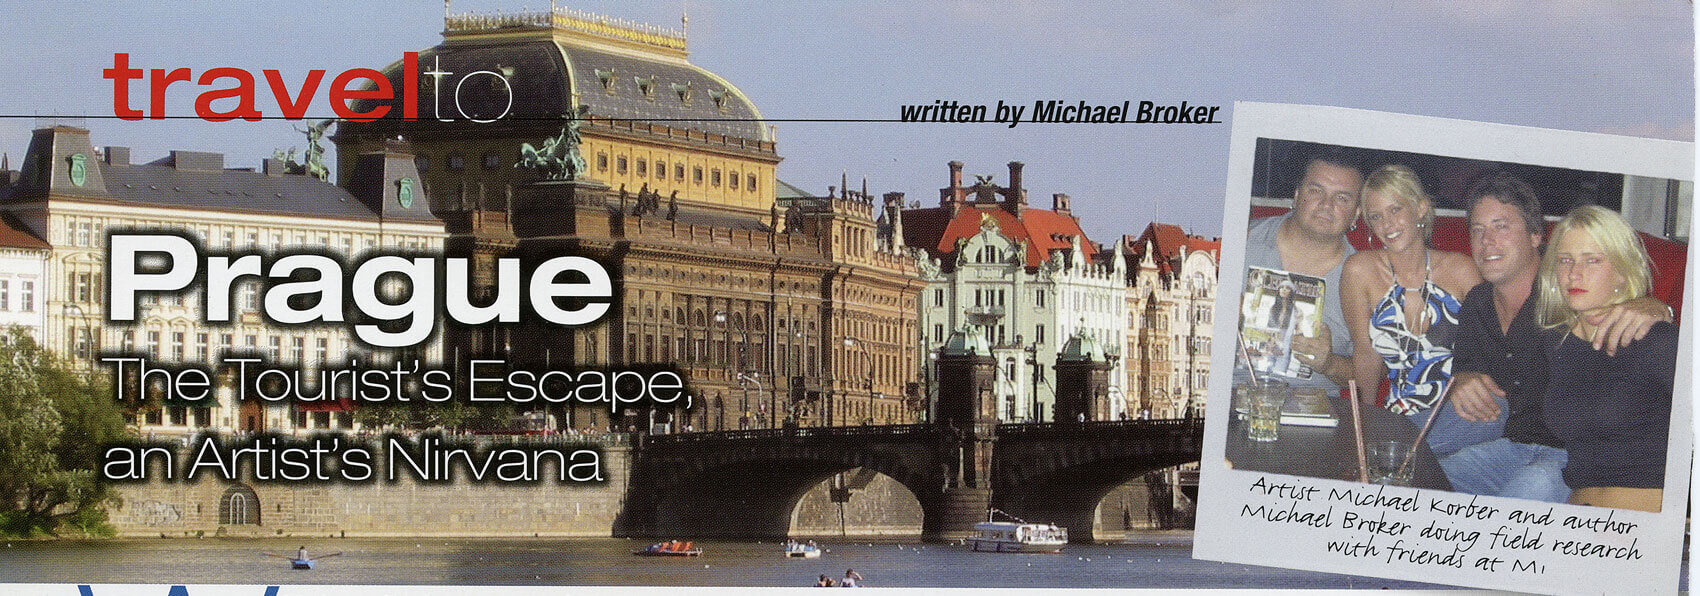 Photo of Article featured in Clematis magazine travel section featuring International artist Michael J. Korber in Prague, Czech Republic.